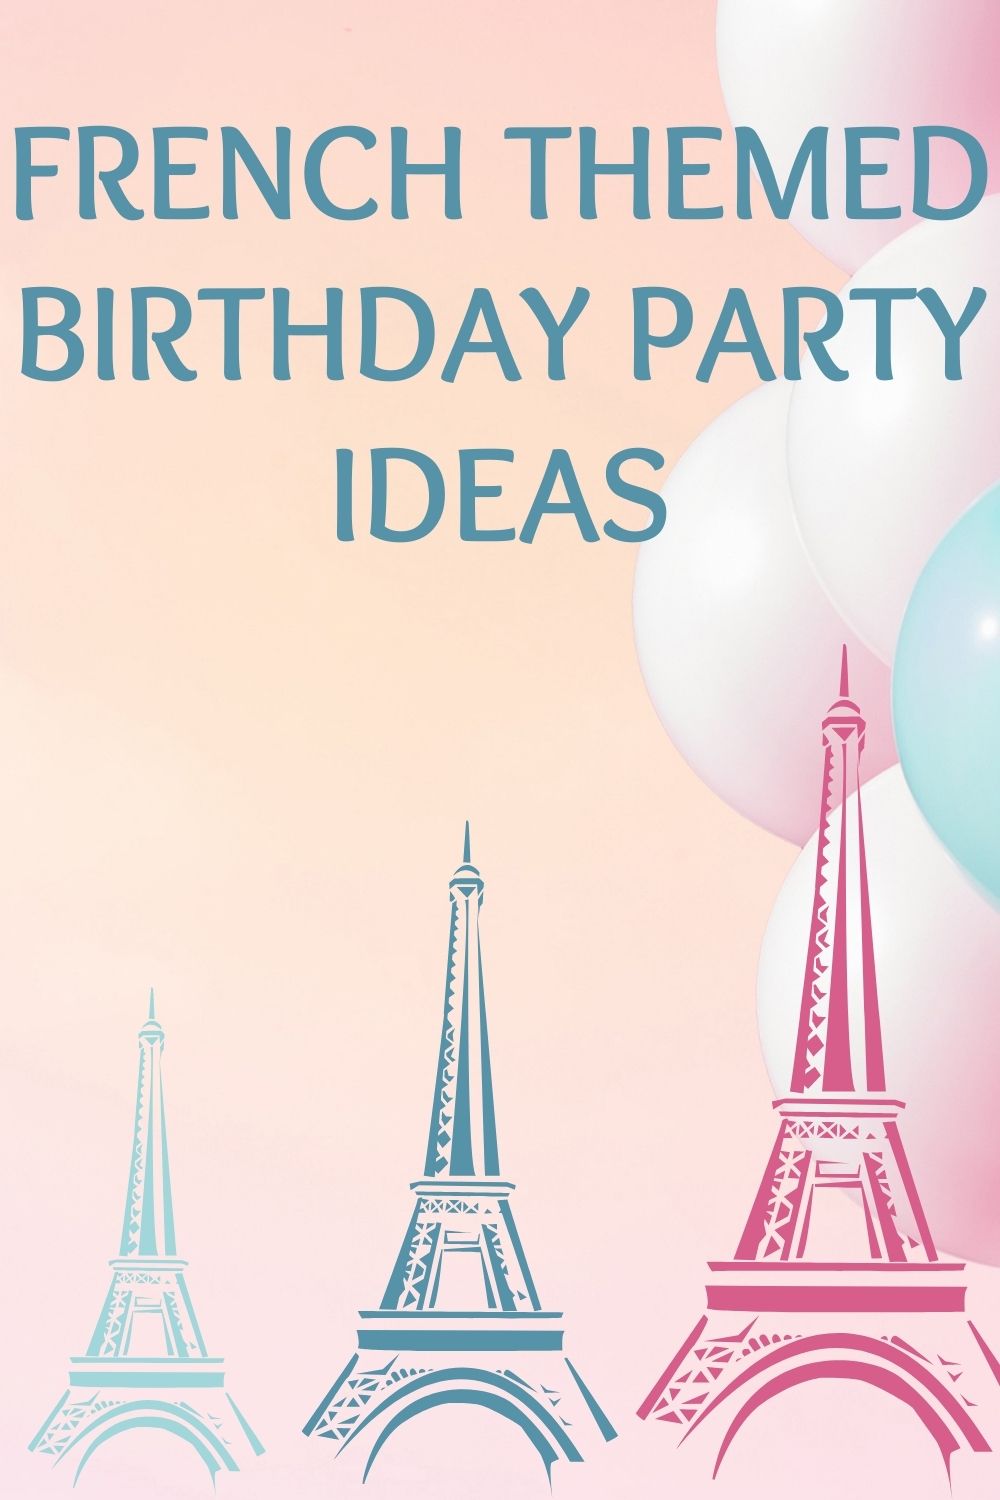 French themed birthday party ideas